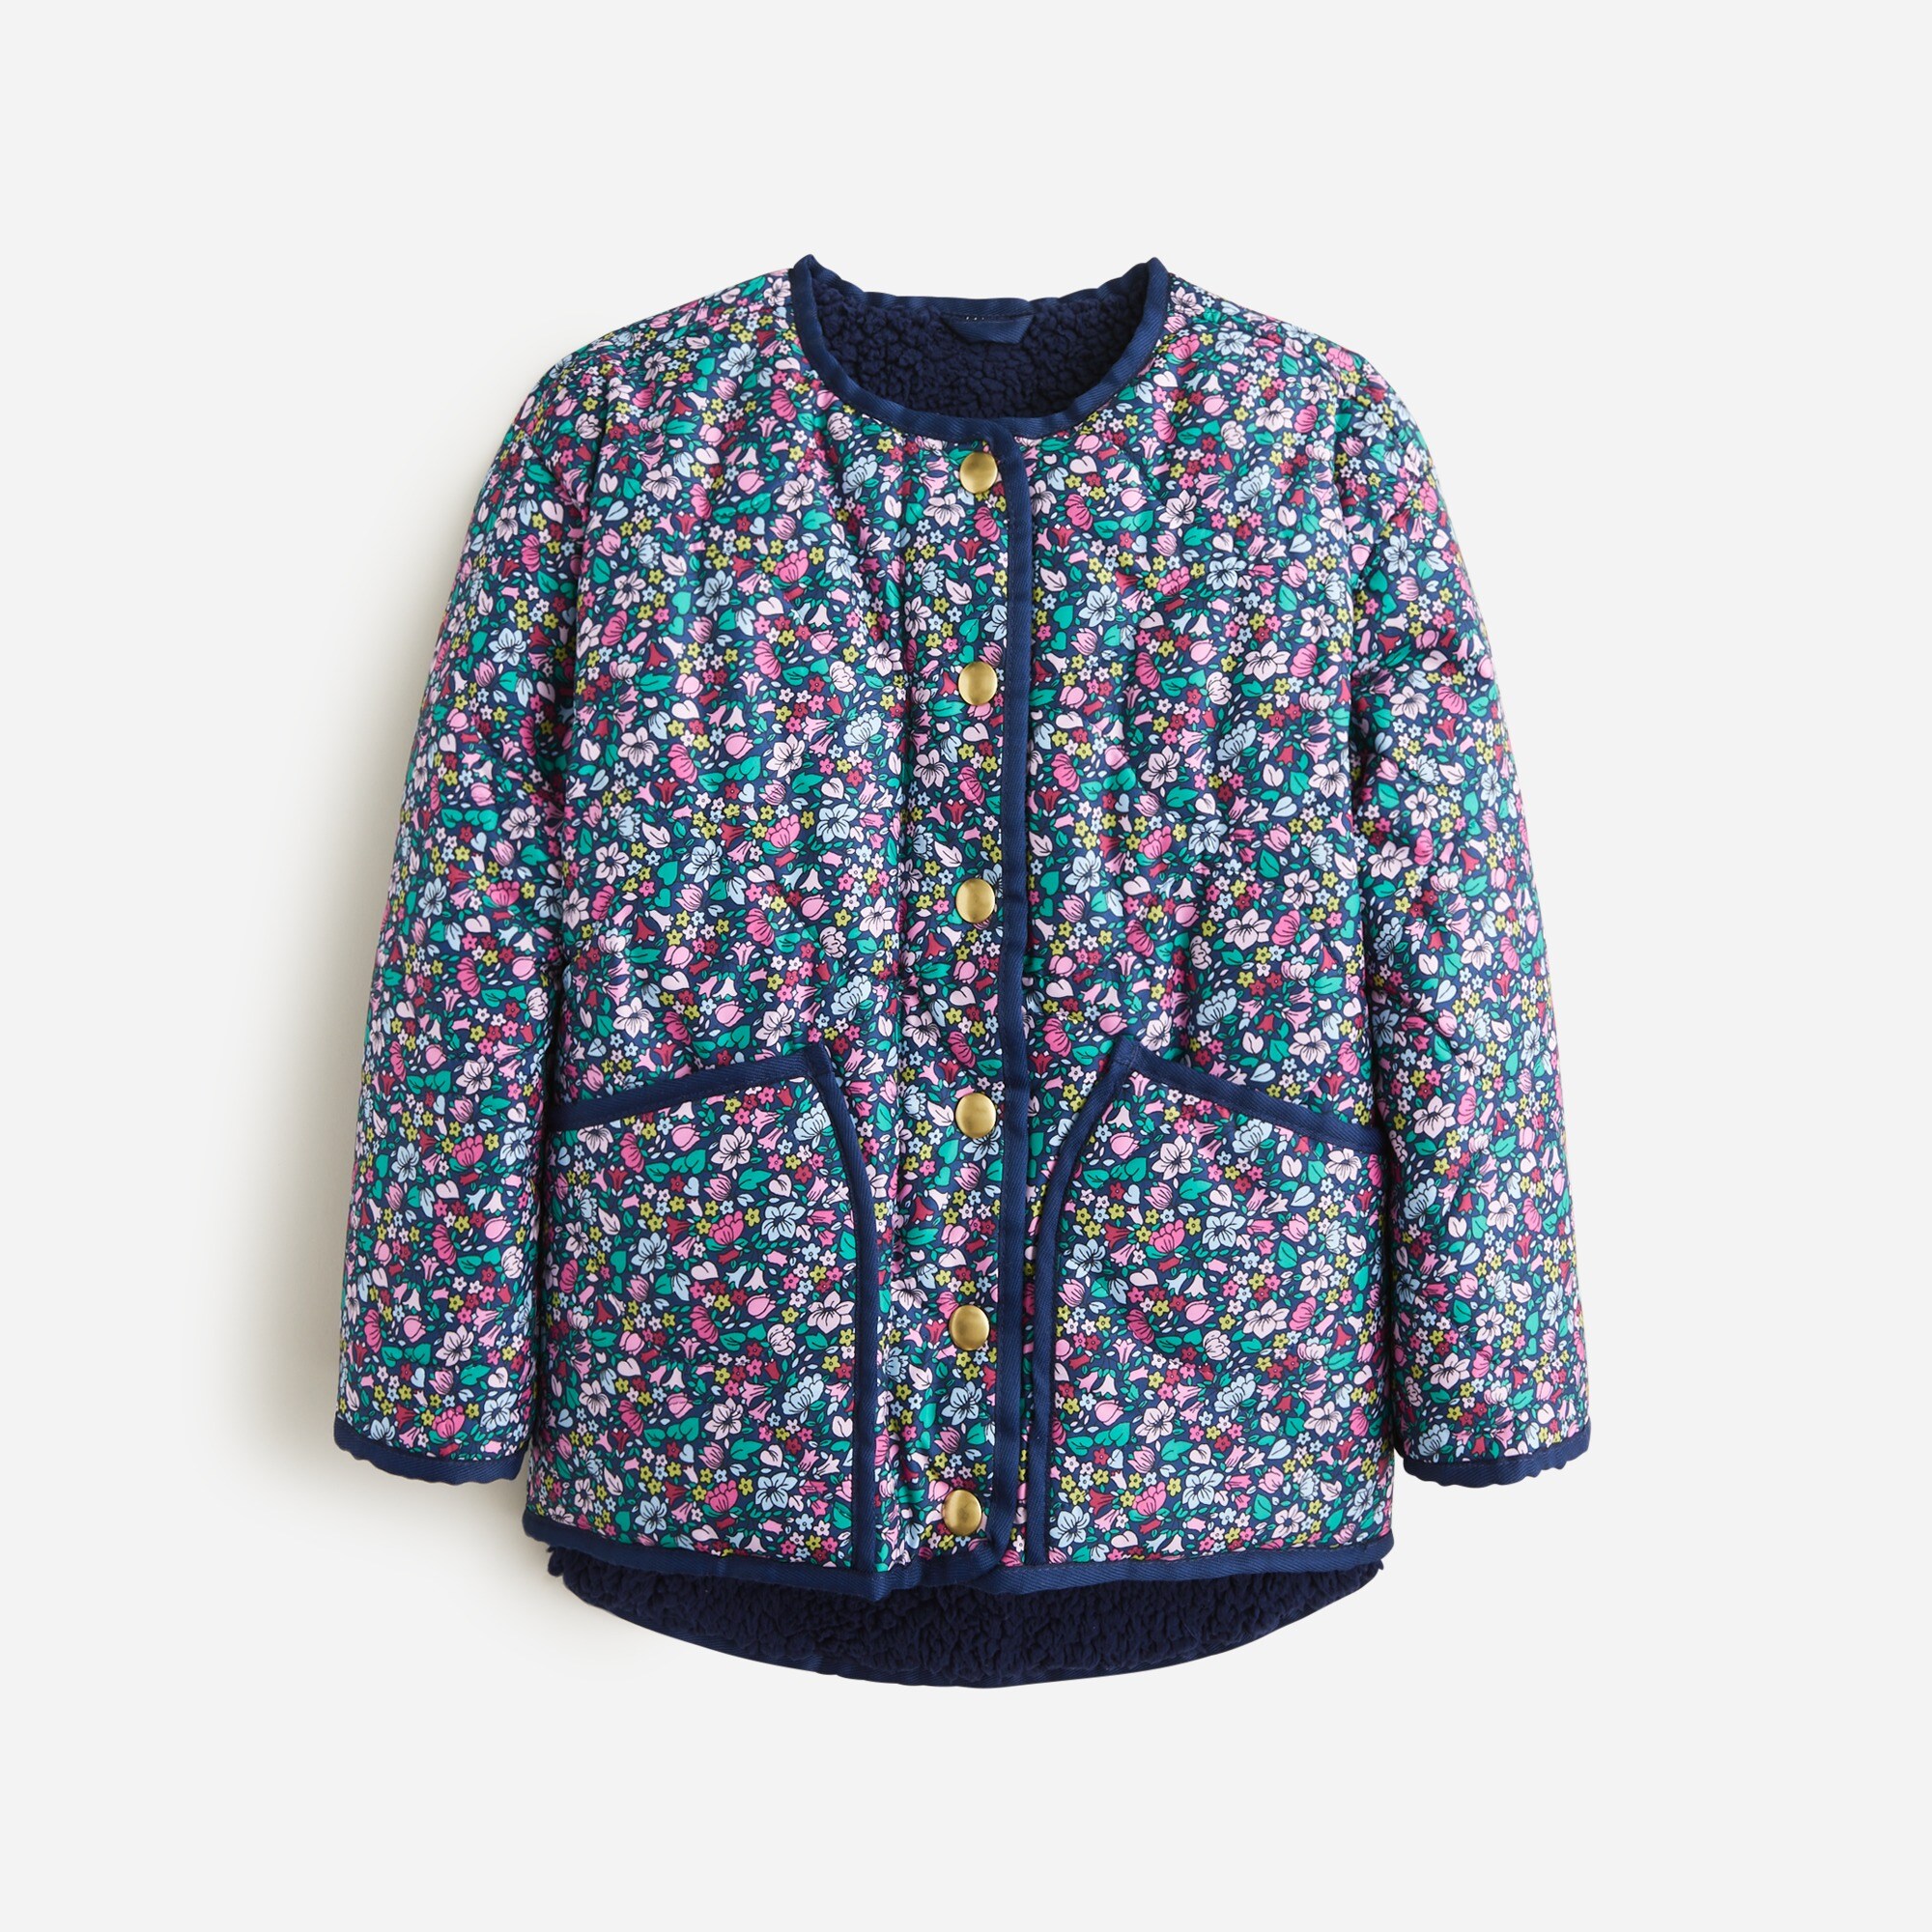  Girls' reversible quilted sherpa jacket